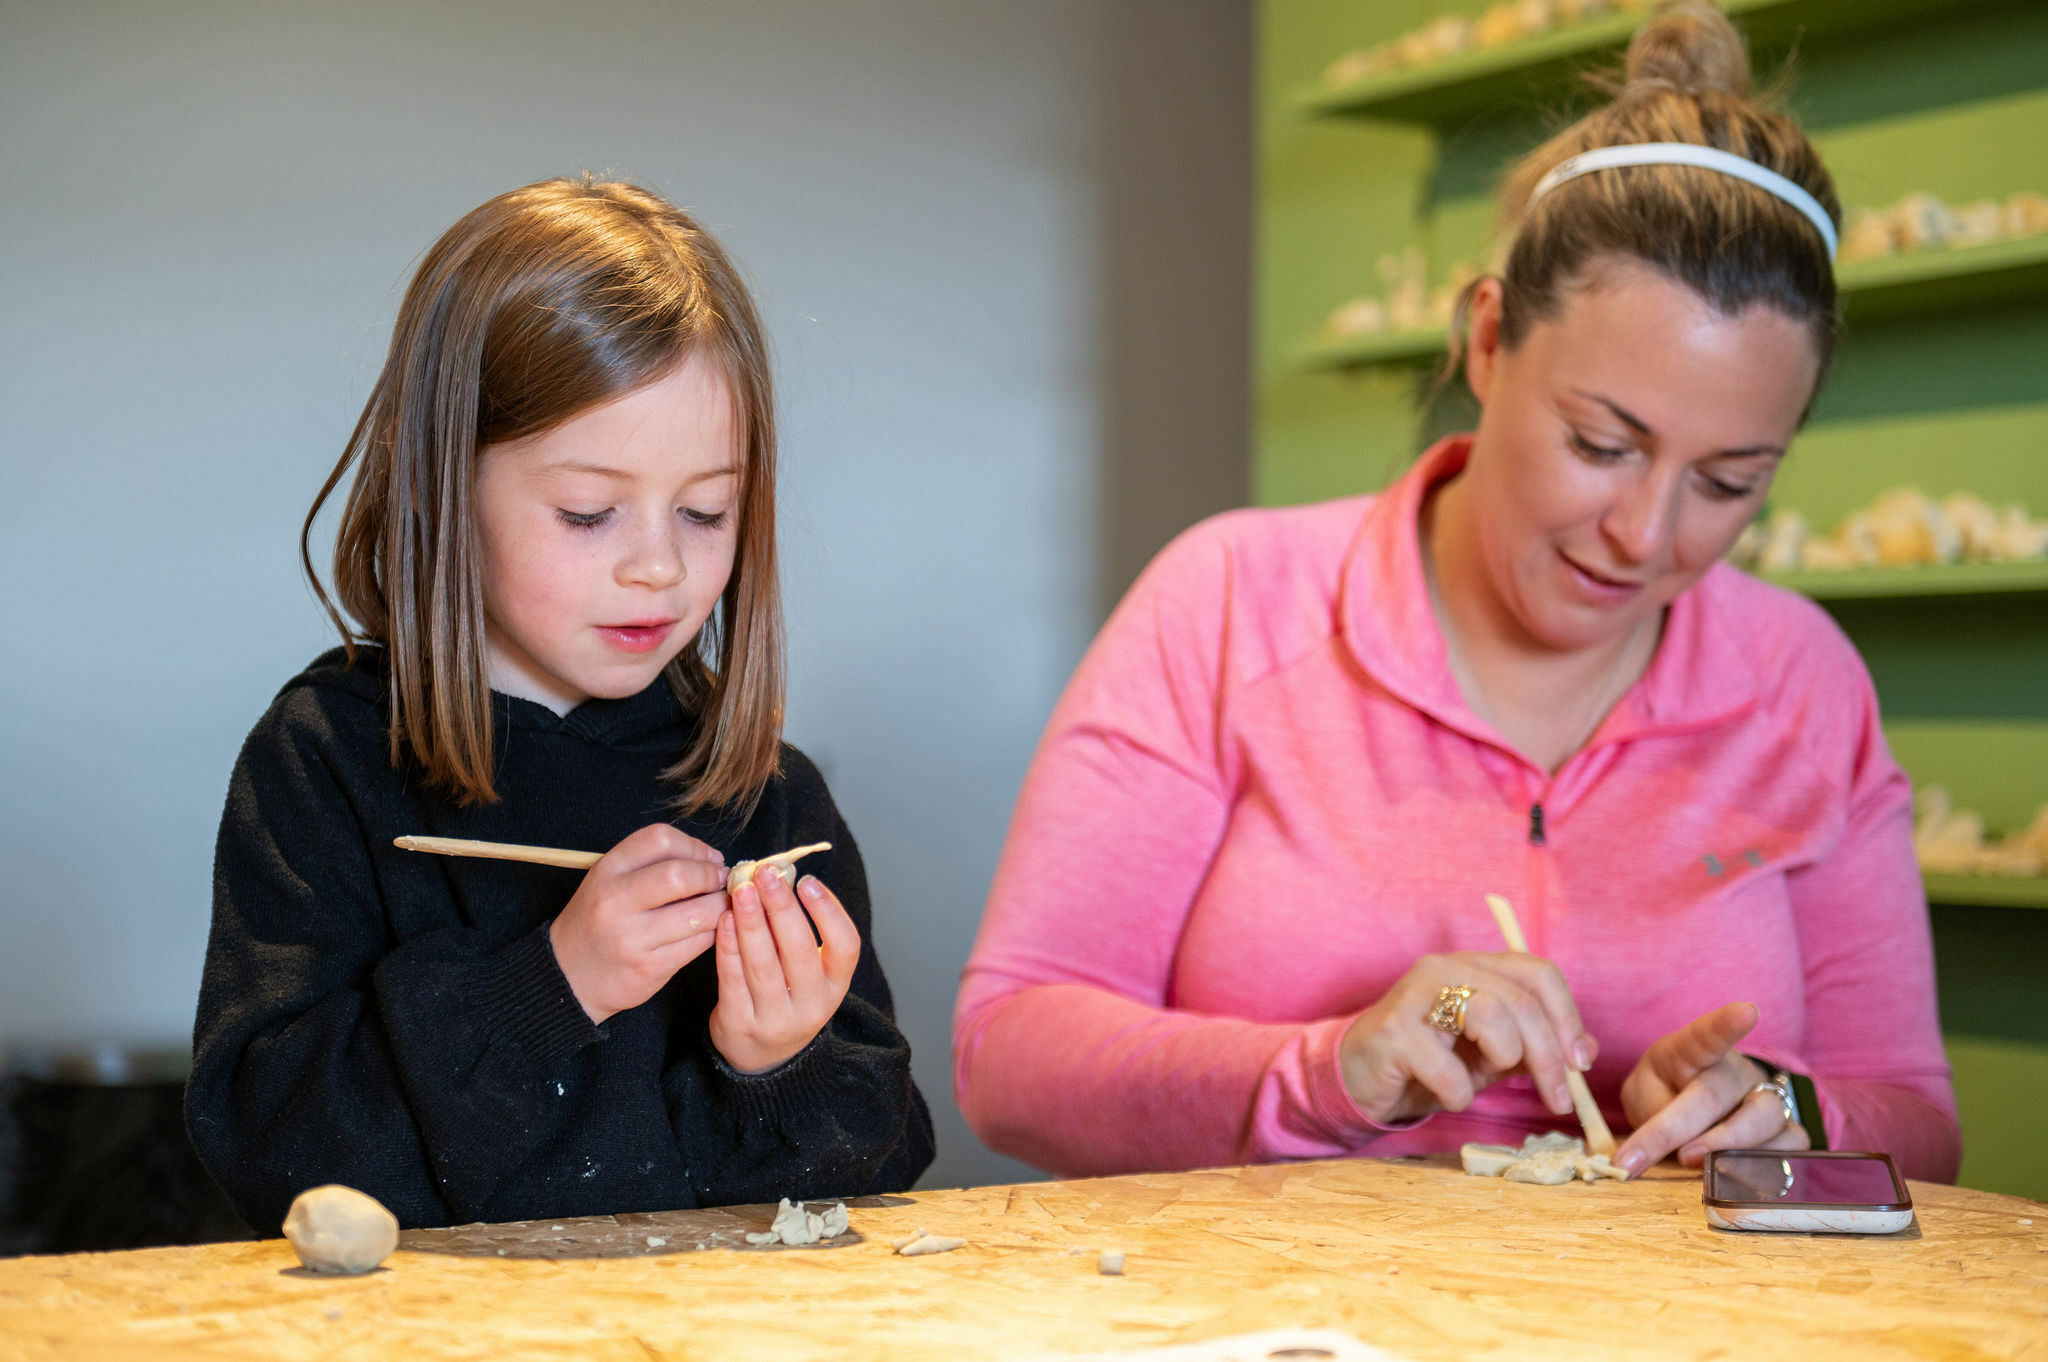 An adult and child making wax animal models